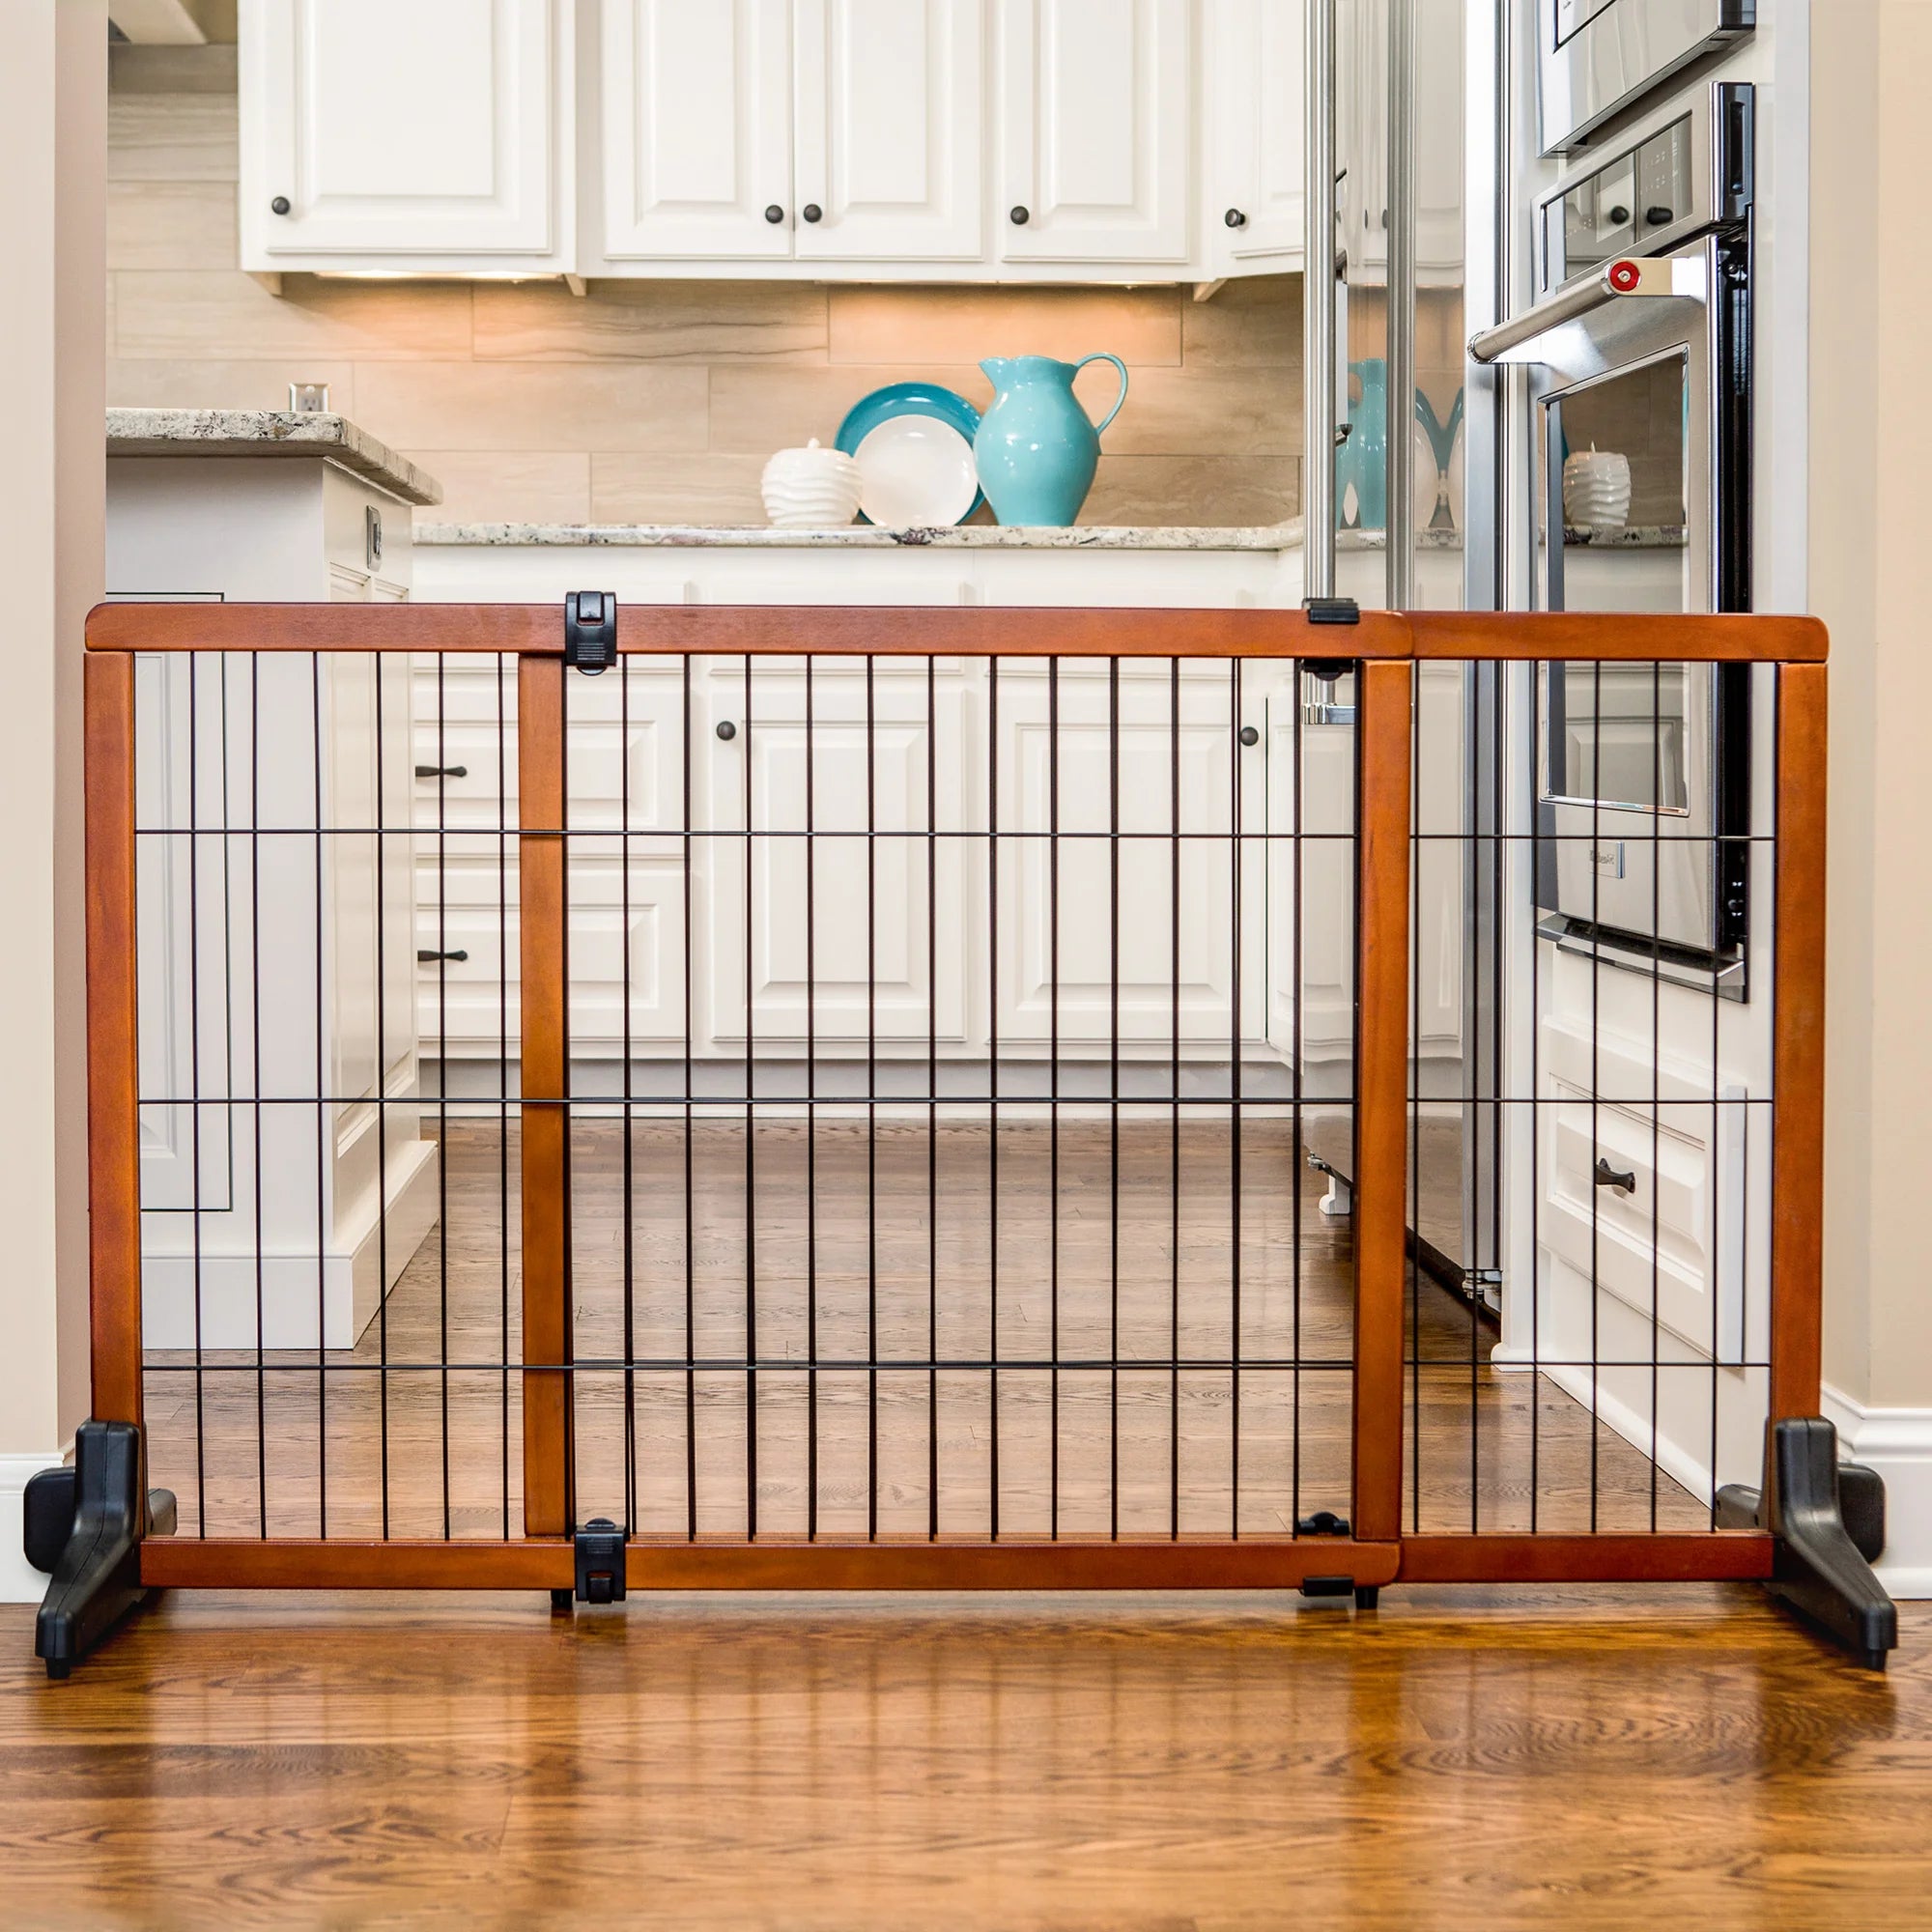 Design Paw Extra Tall Extra Wide Freestanding Pet Gate in a kitchen.